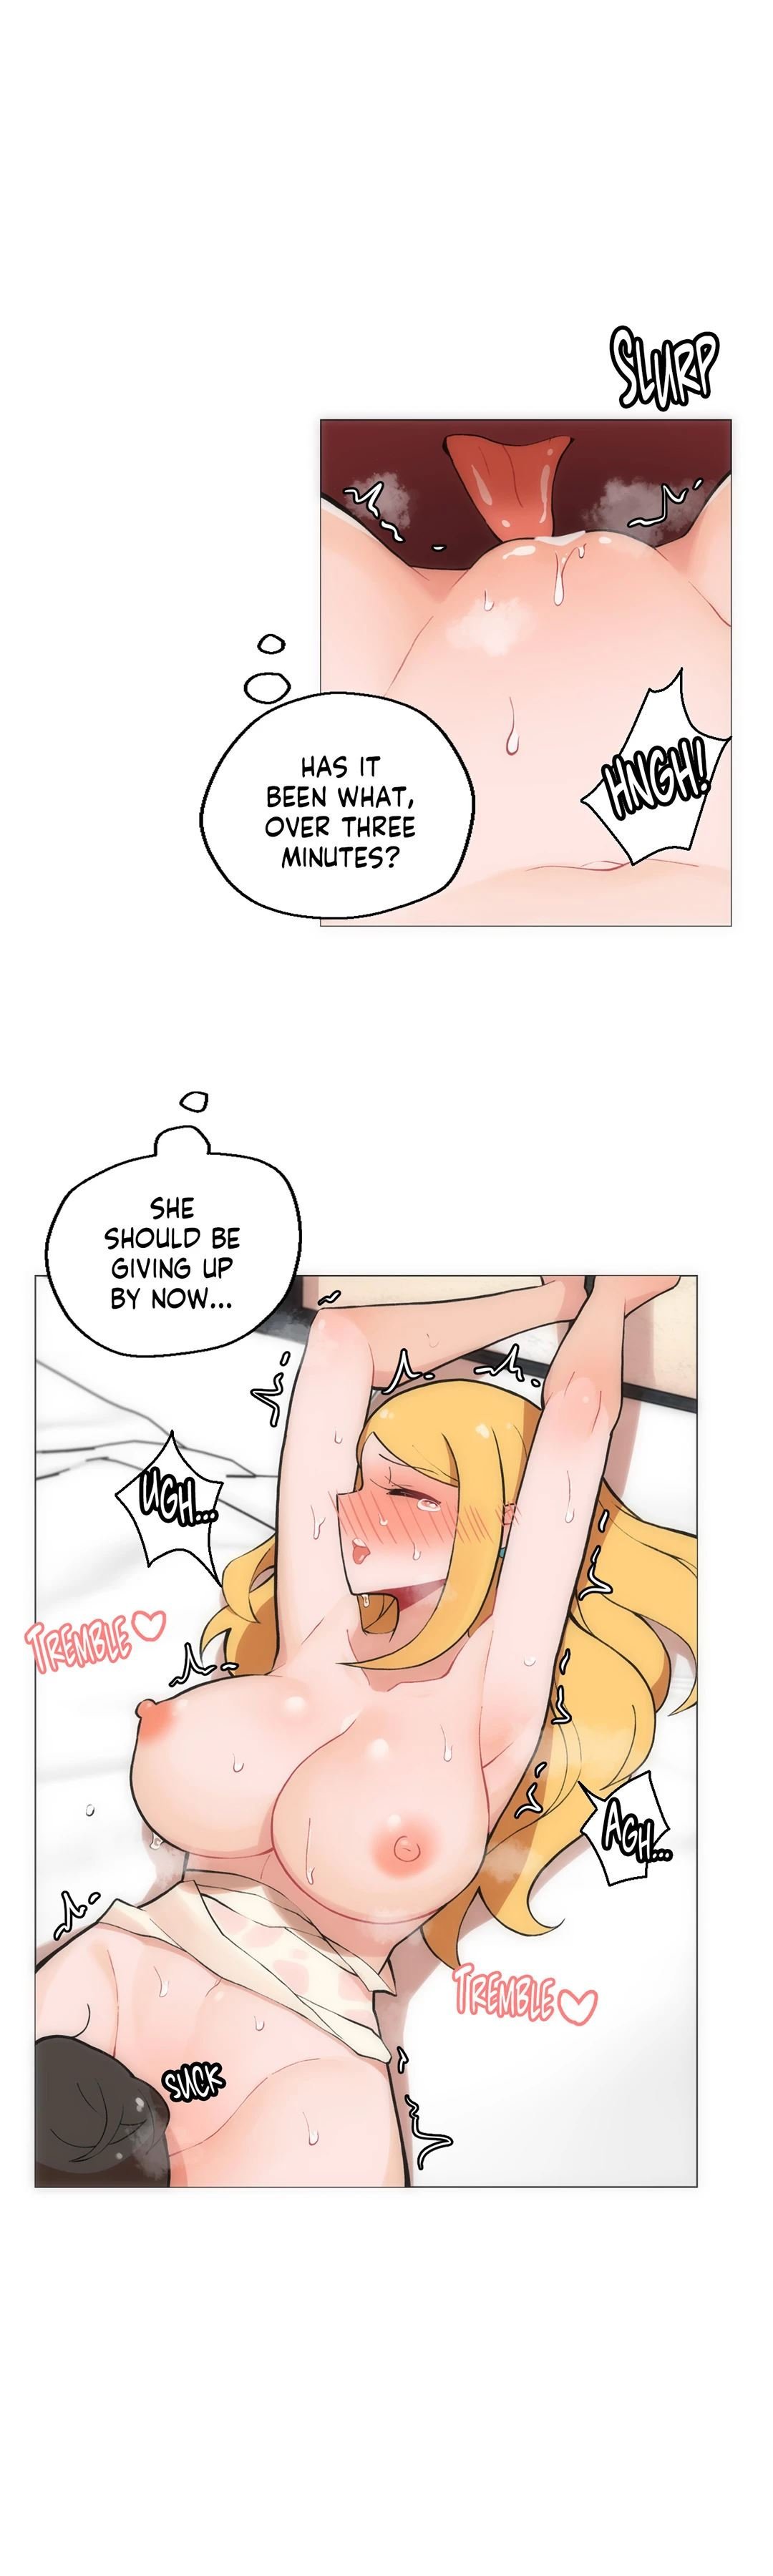 sexcape-room-good-game-chap-3-29